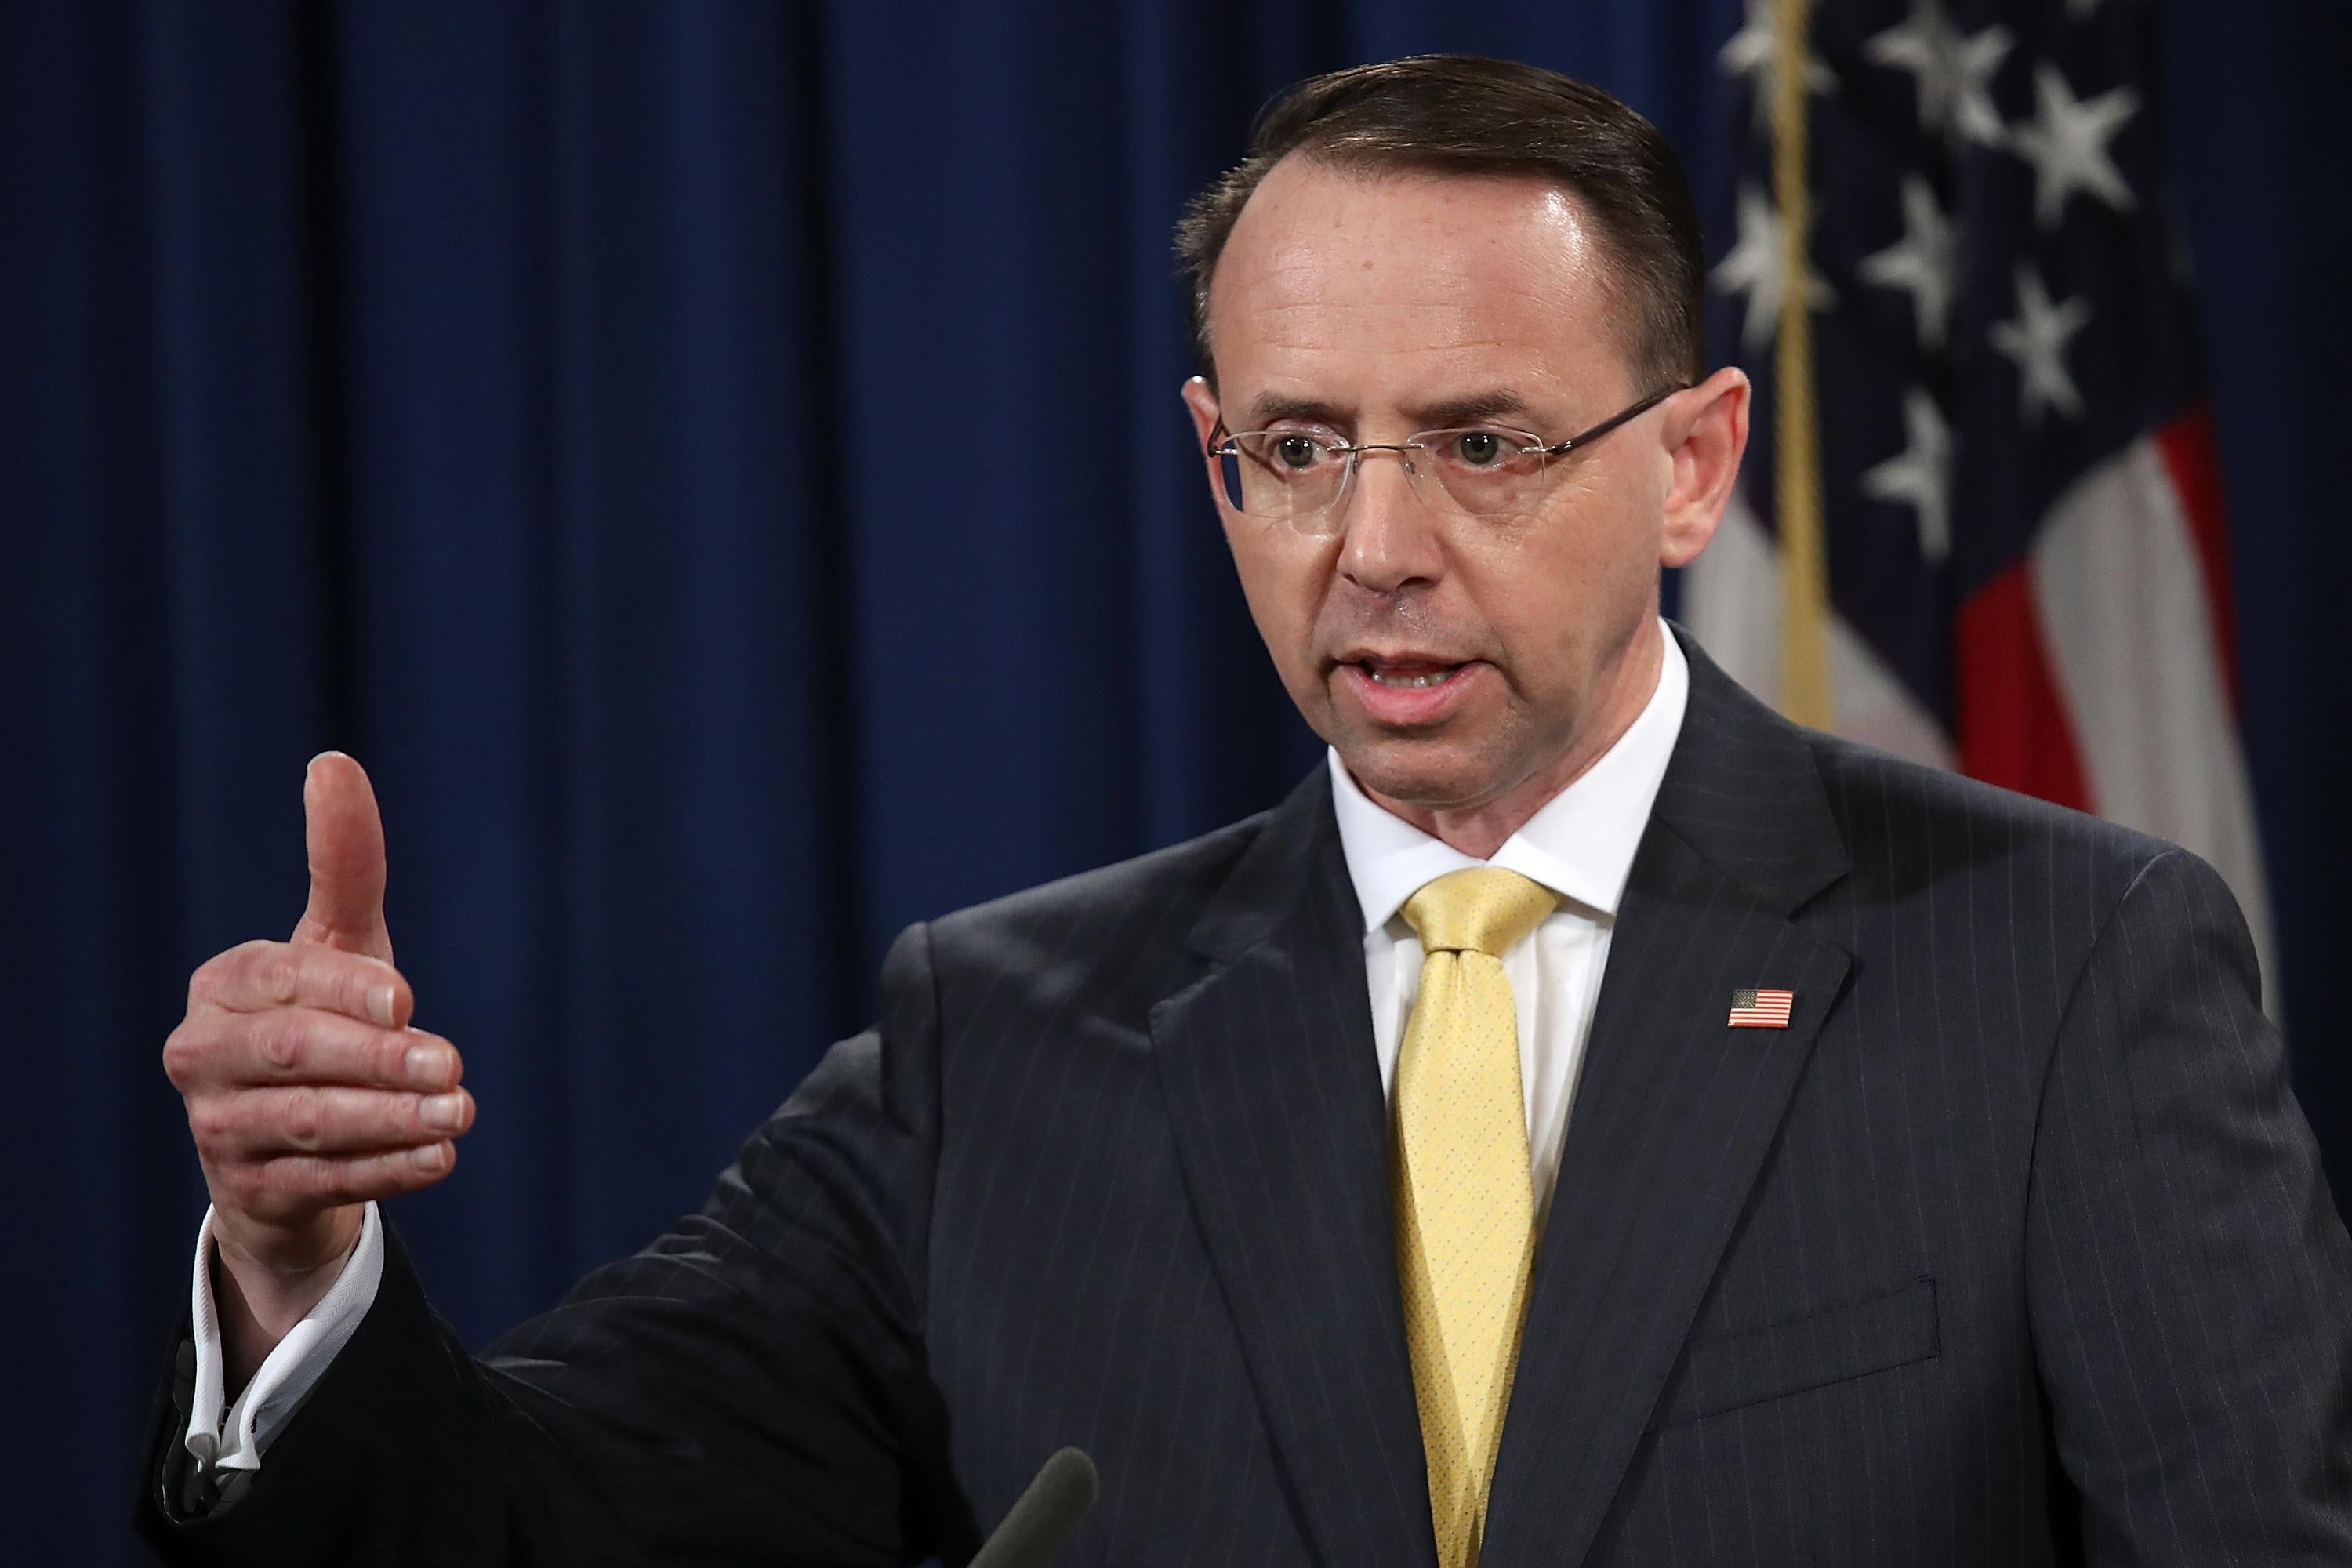 U.S. Deputy Attorney General Rod Rosenstein announces the indictment of 13 Russian nationals and 3 Russian organizations for meddling in the 2016 U.S. presidential election.